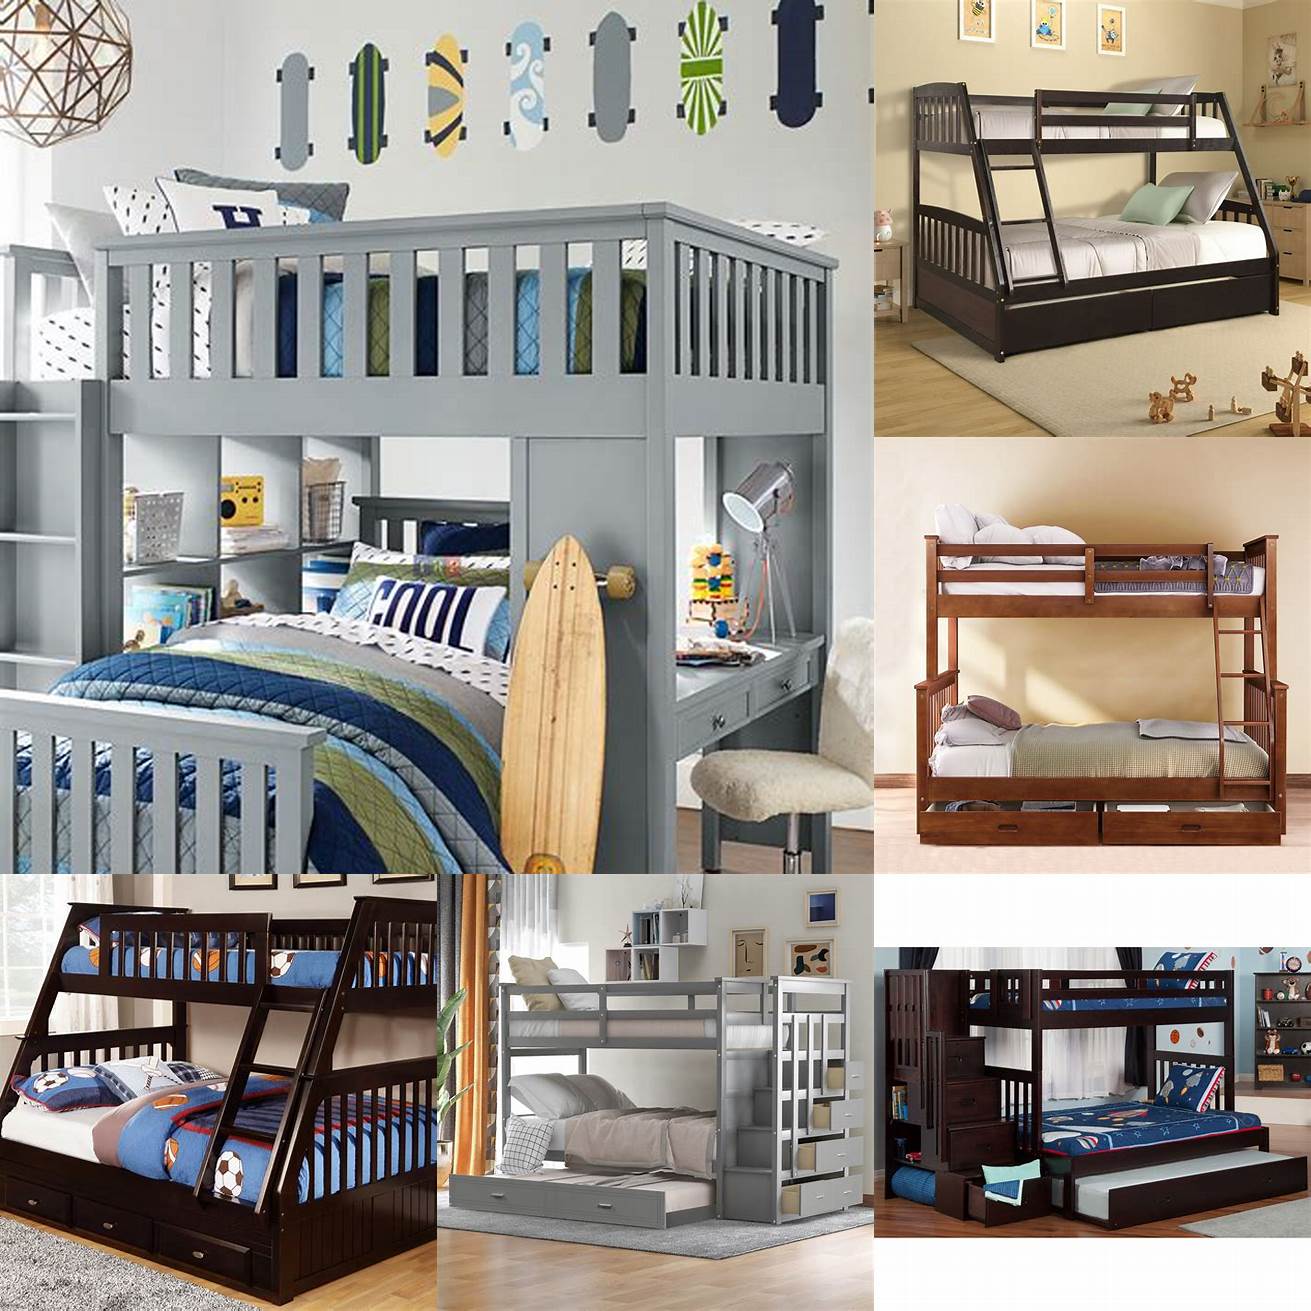 Cost-effective Boys bunk beds are often less expensive than buying two separate beds